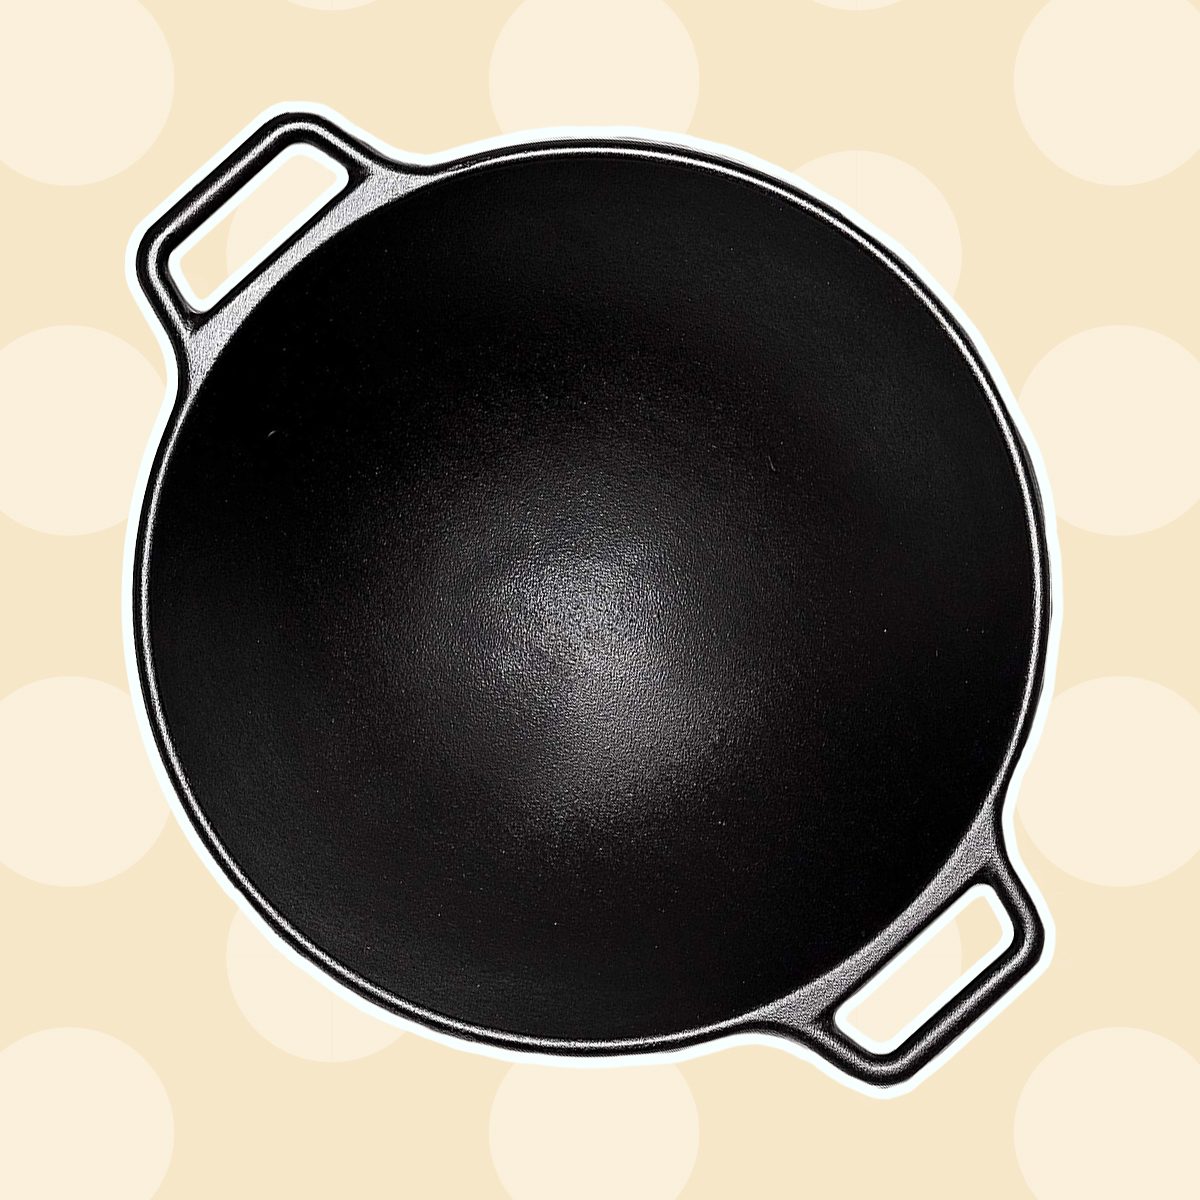 12 Types of Cast-Iron Cookware You Should Know About